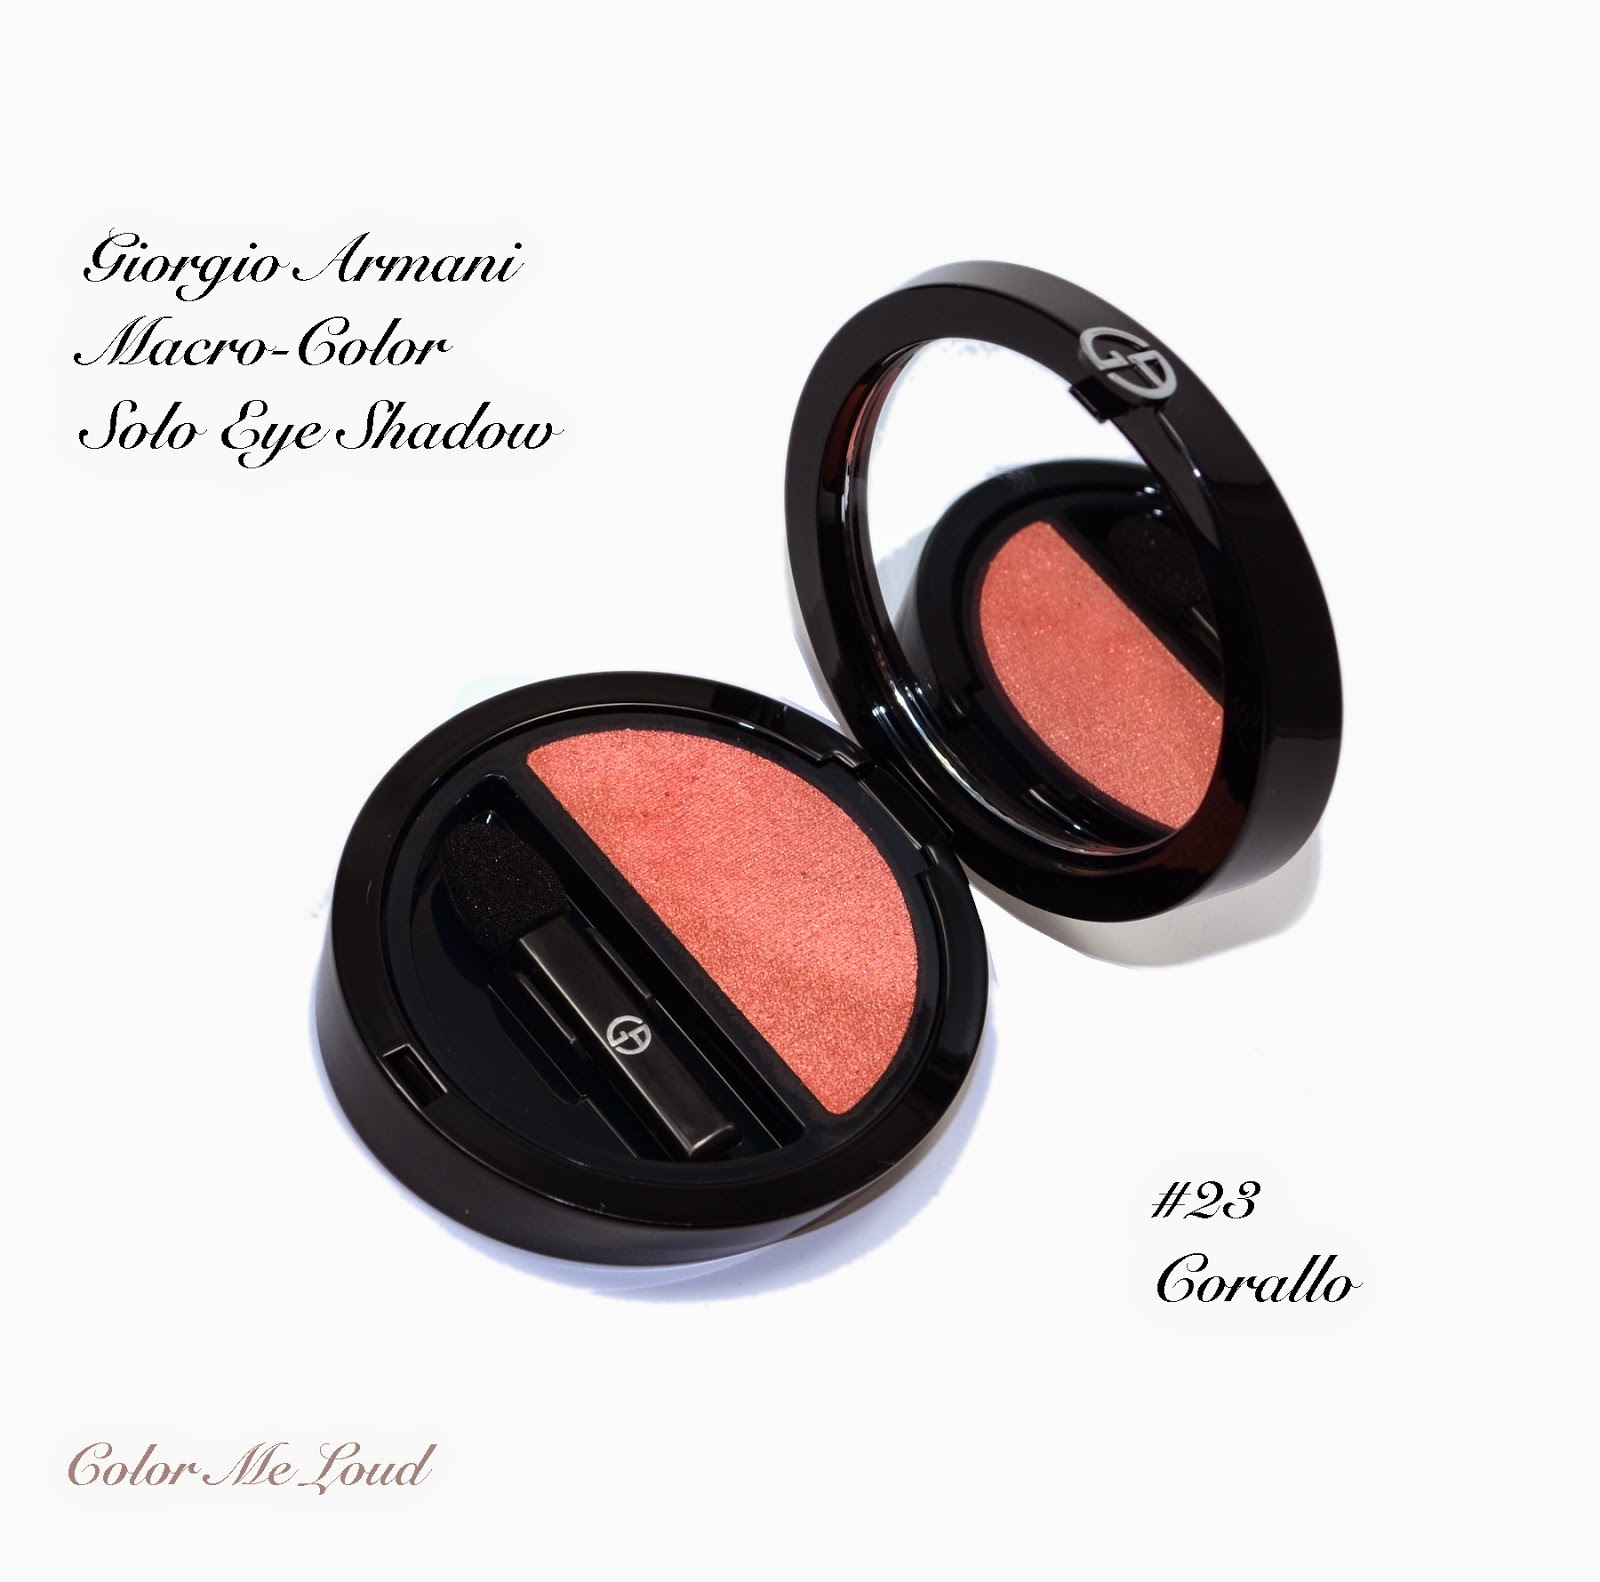 Wearing Coral on Eyes: Giorgio Armani Eyes To Kill Macro-Color Solo Eyeshadow #23 Corallo, Swatch, Review & FOTD